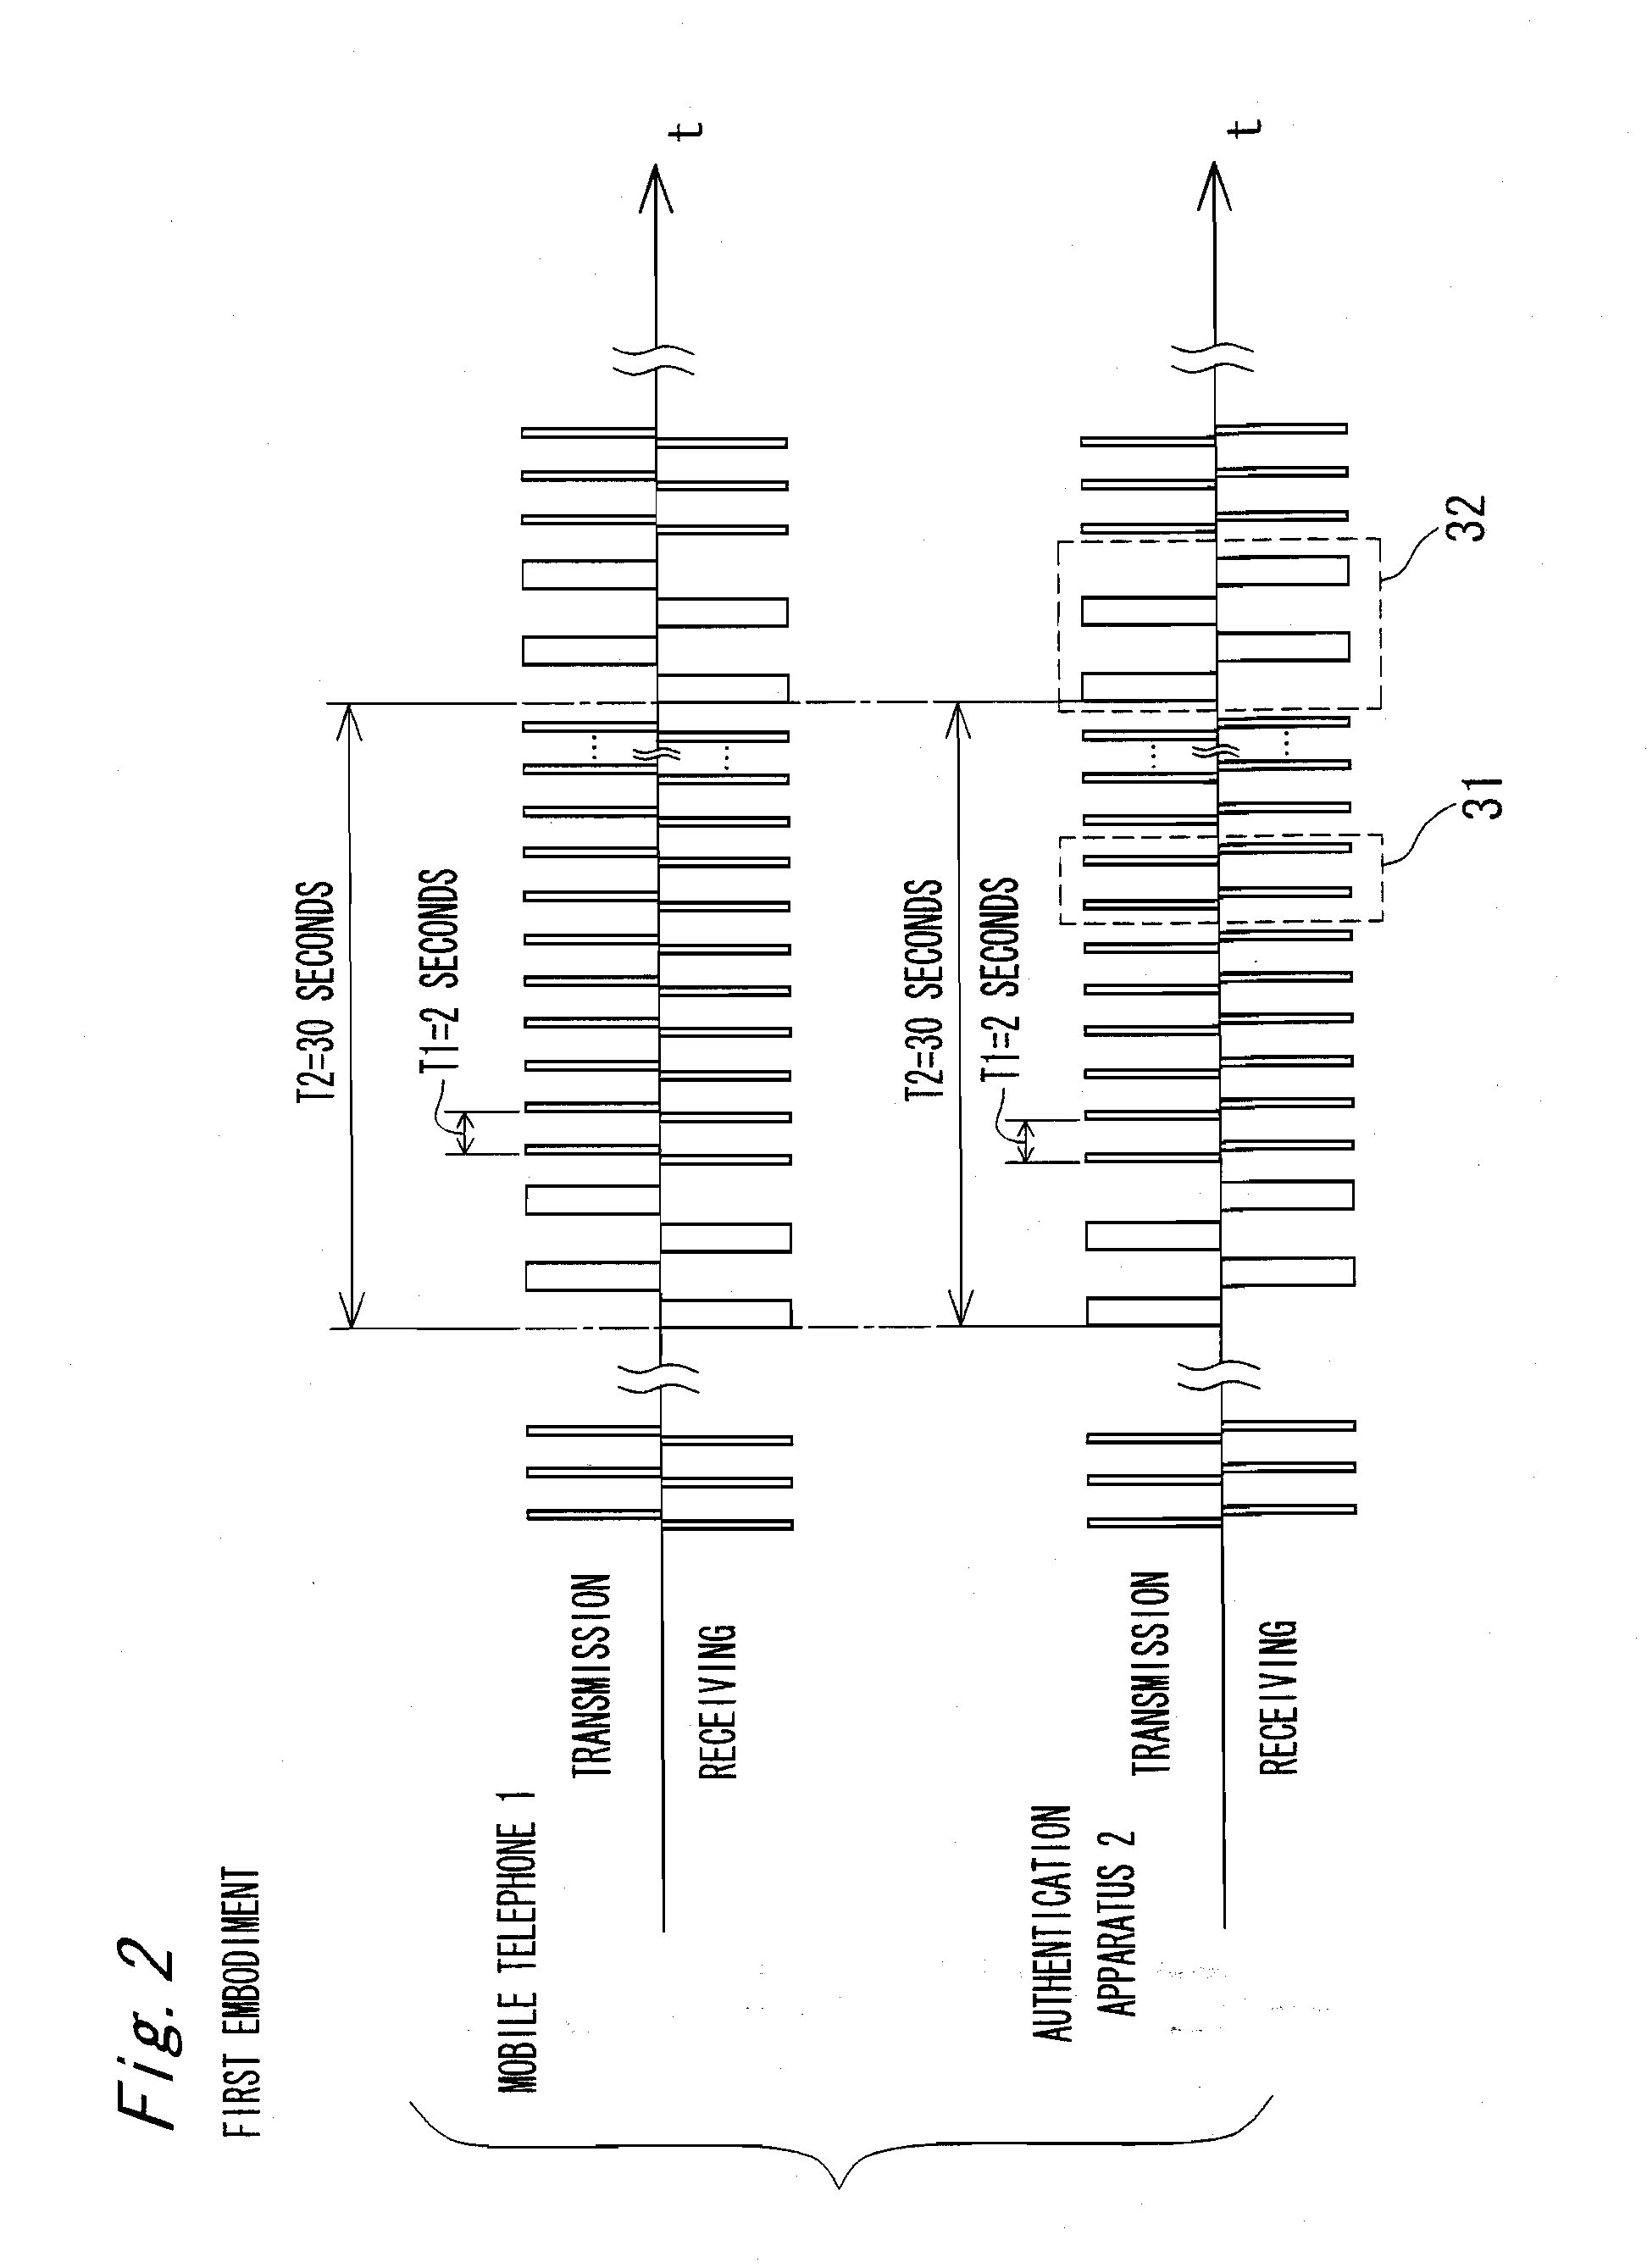 Wireless device monitoring system including unauthorized apparatus
and authentication apparatus with security authentication function